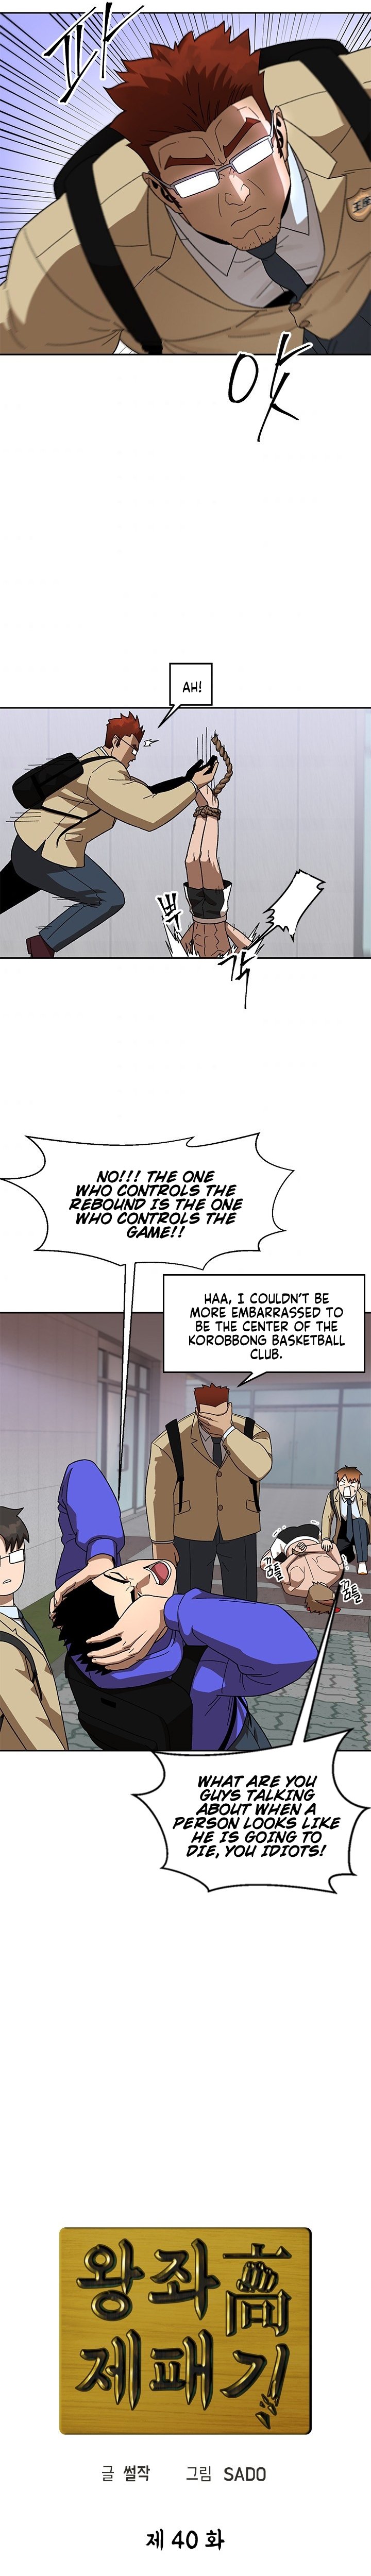 Conquer The Throne Highschool - Page 3